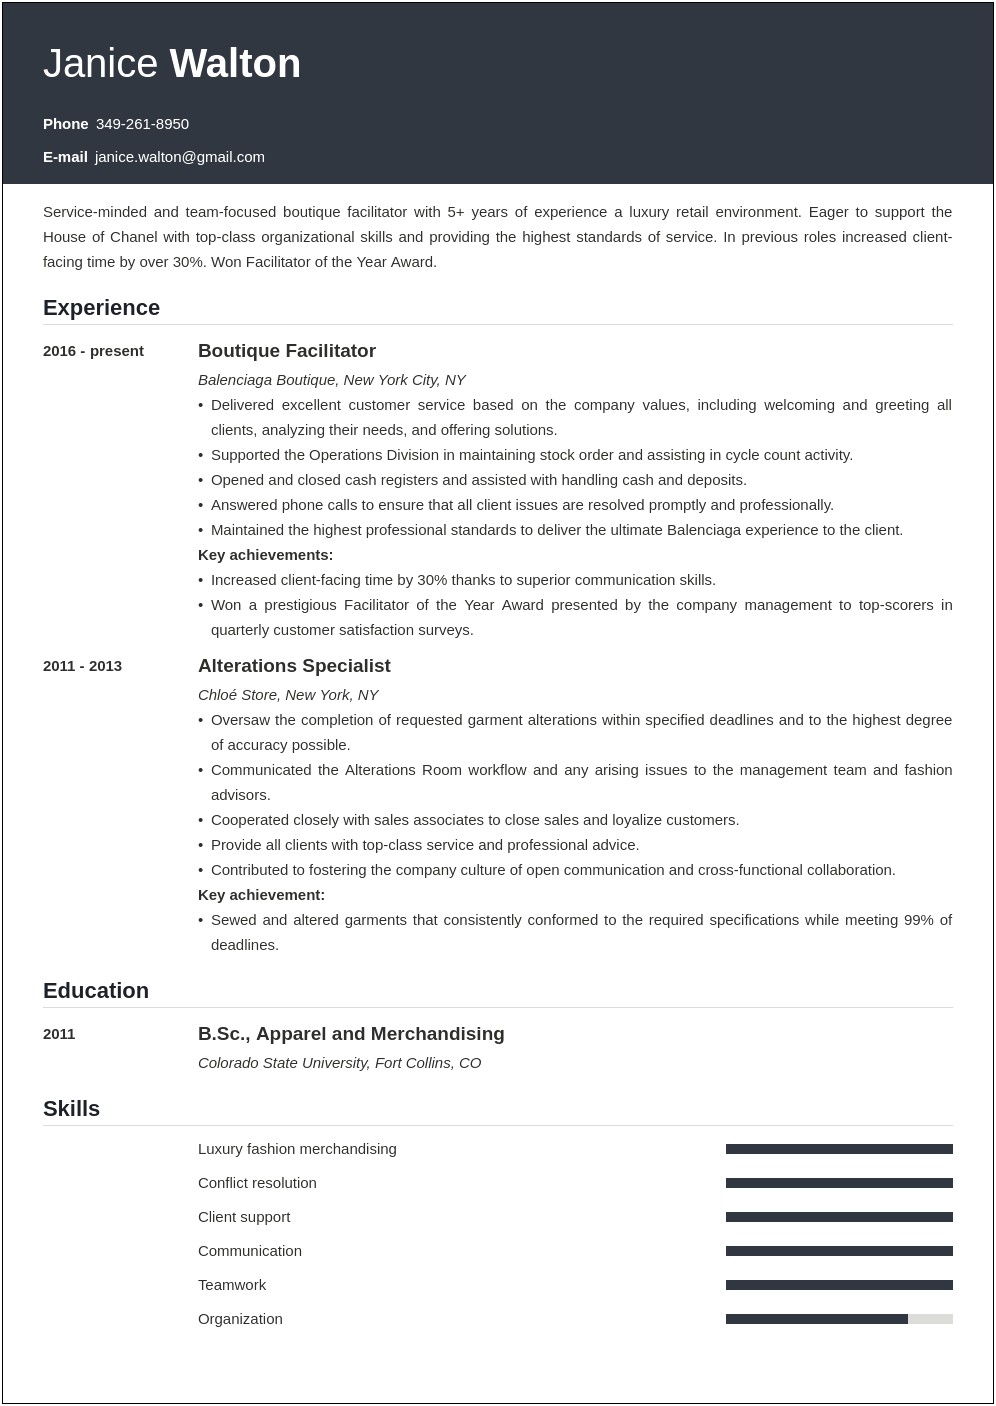 Is Fashion A Good Interest For A Resume